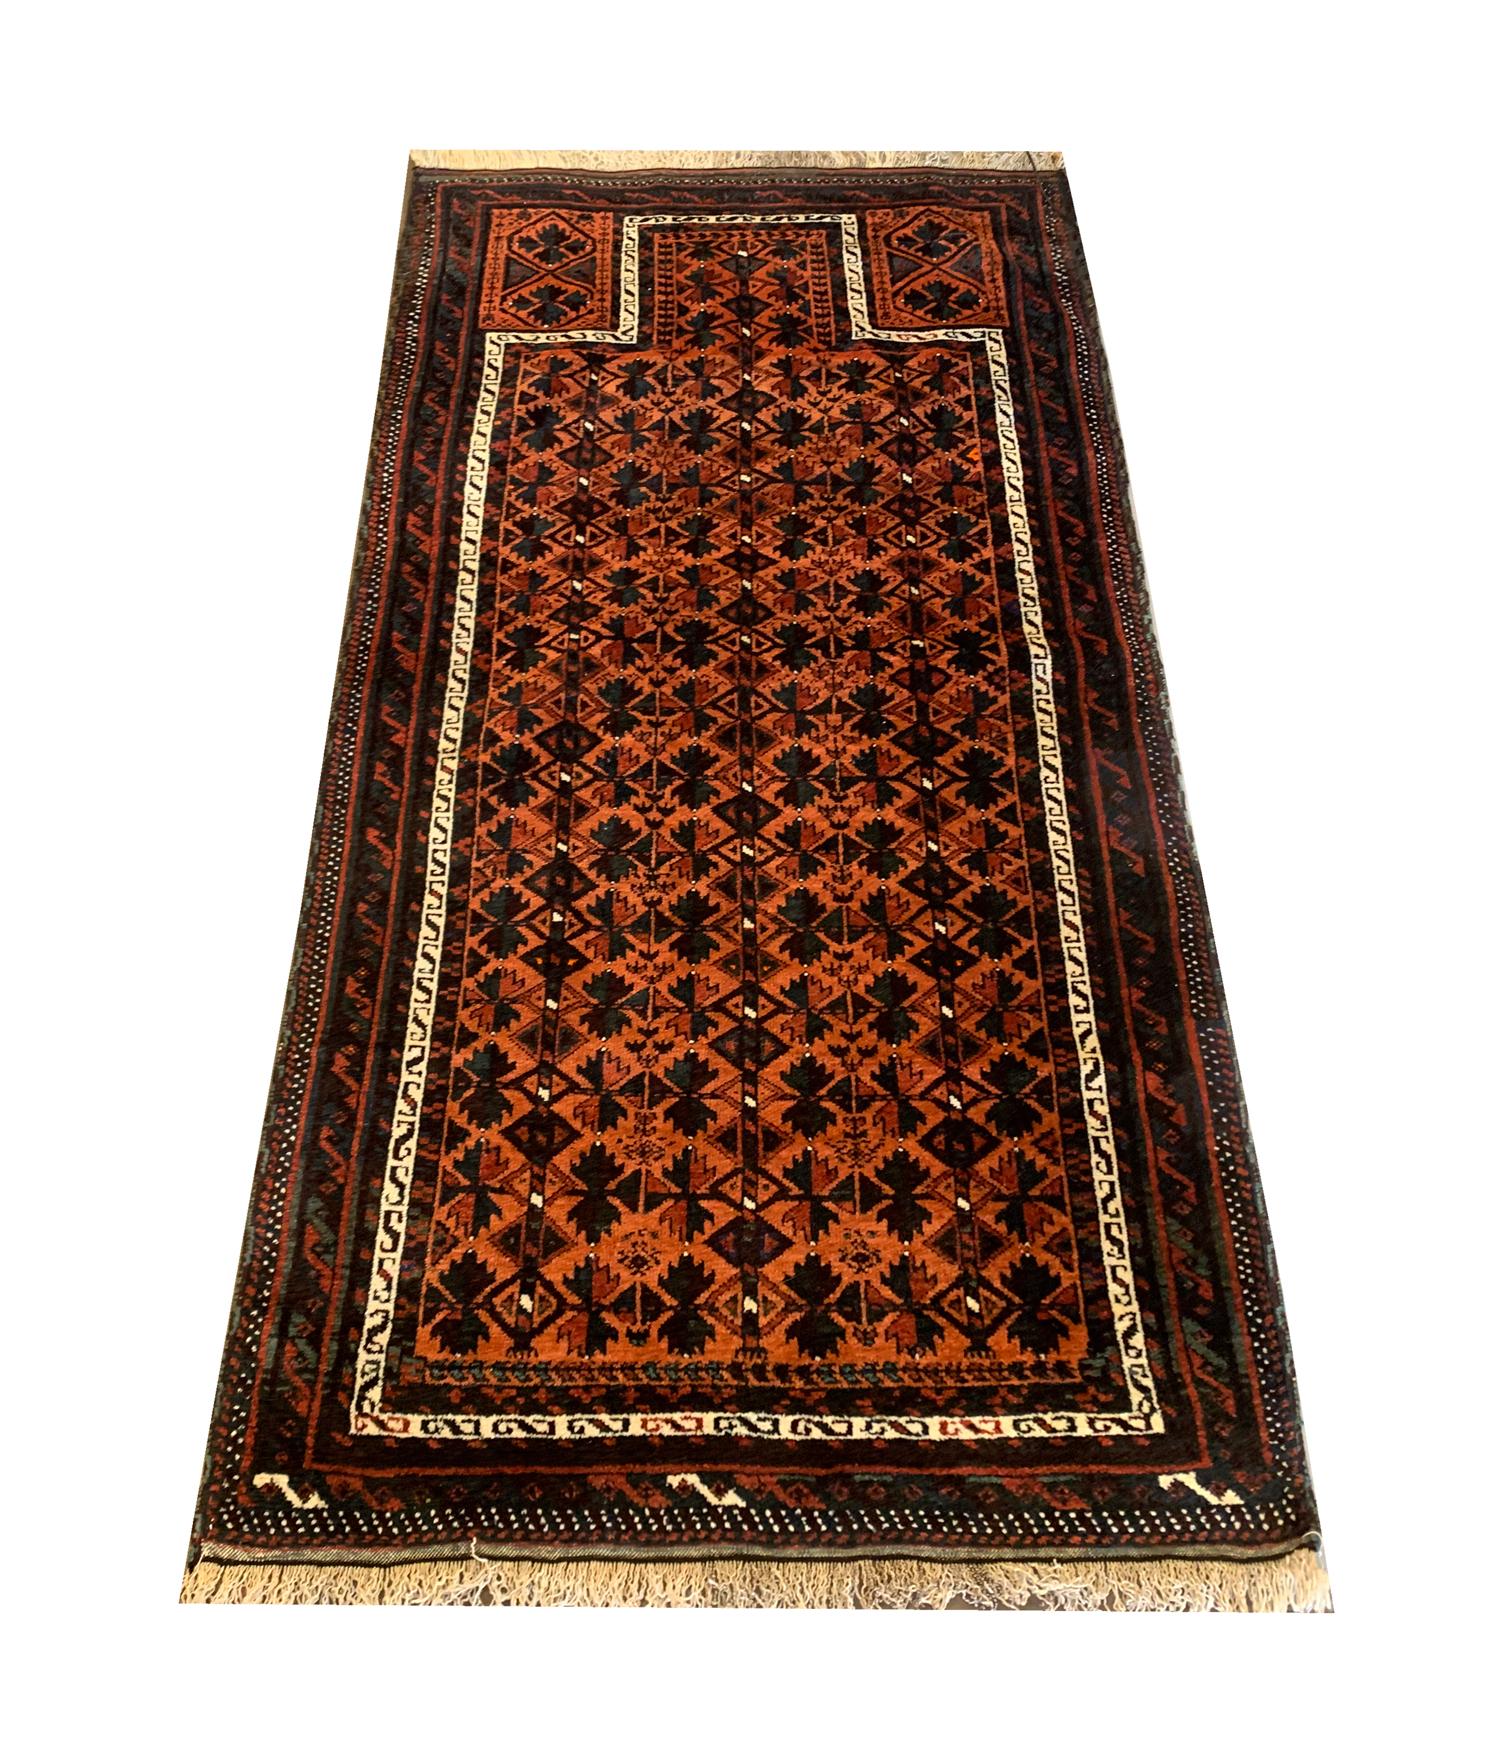 This fine wool rug is an excellent handwoven carpet; this antique piece was constructed in 1920 with locally sourced organic materials. The central design features a rich orange background with brown, black and blue accents that make up the repeat